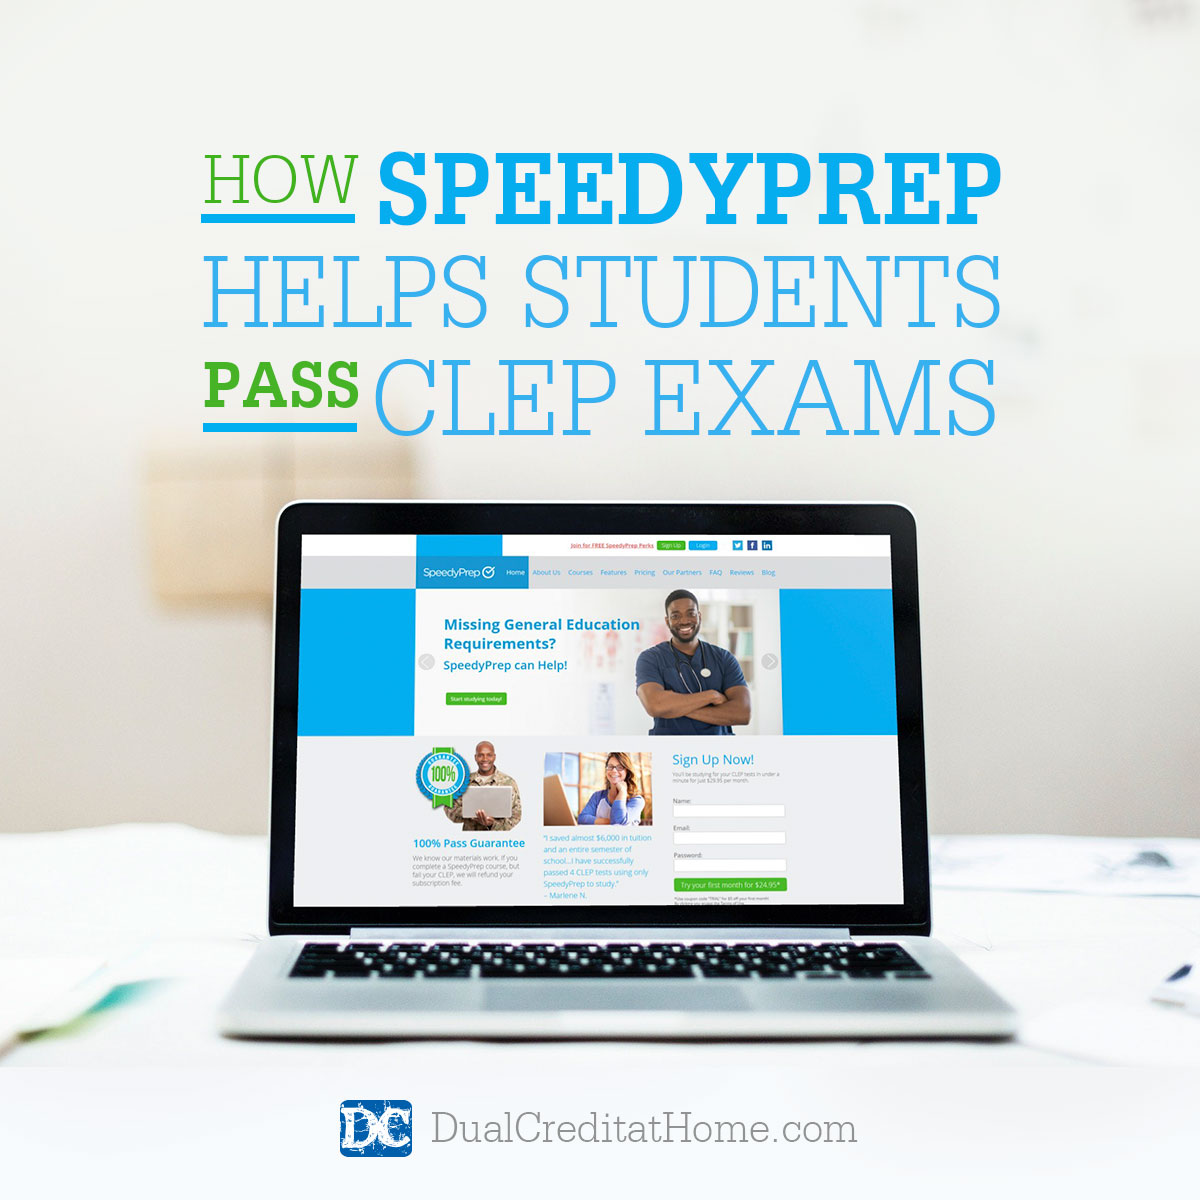 How SpeedyPrep Helps Students Pass CLEP Exams